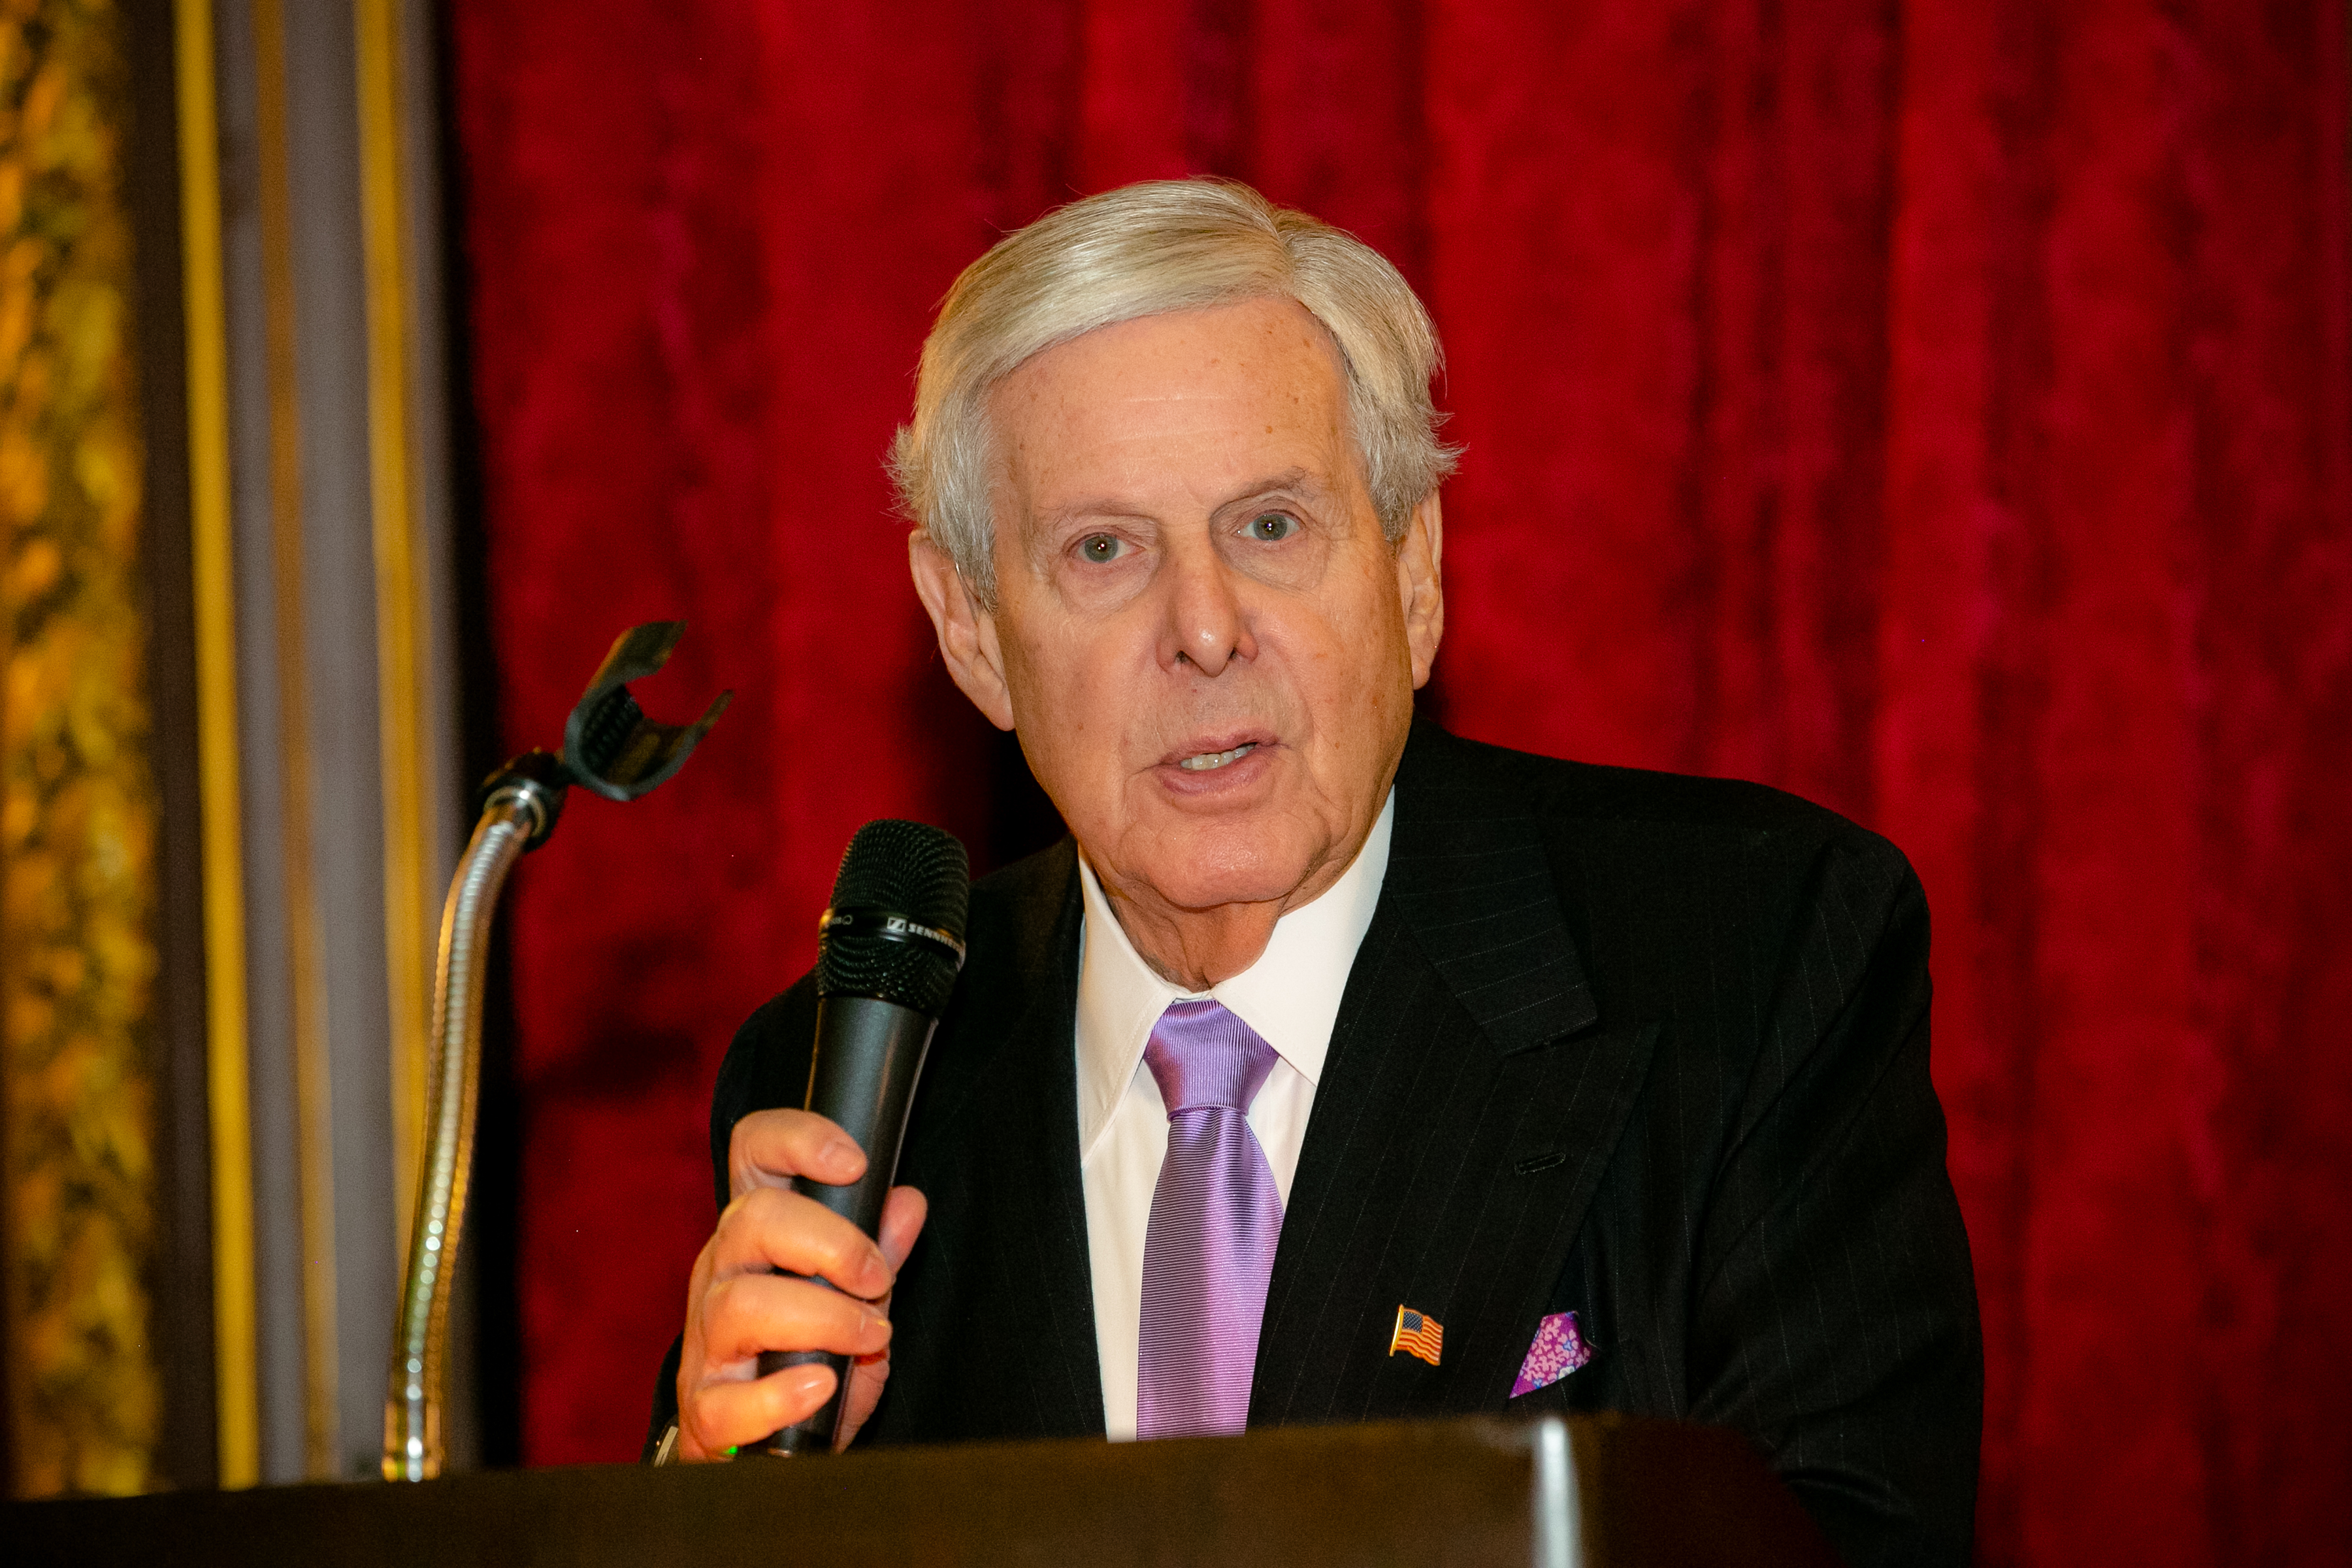 A man making a speech wearing a black suit with a purple tie and holding a microphone